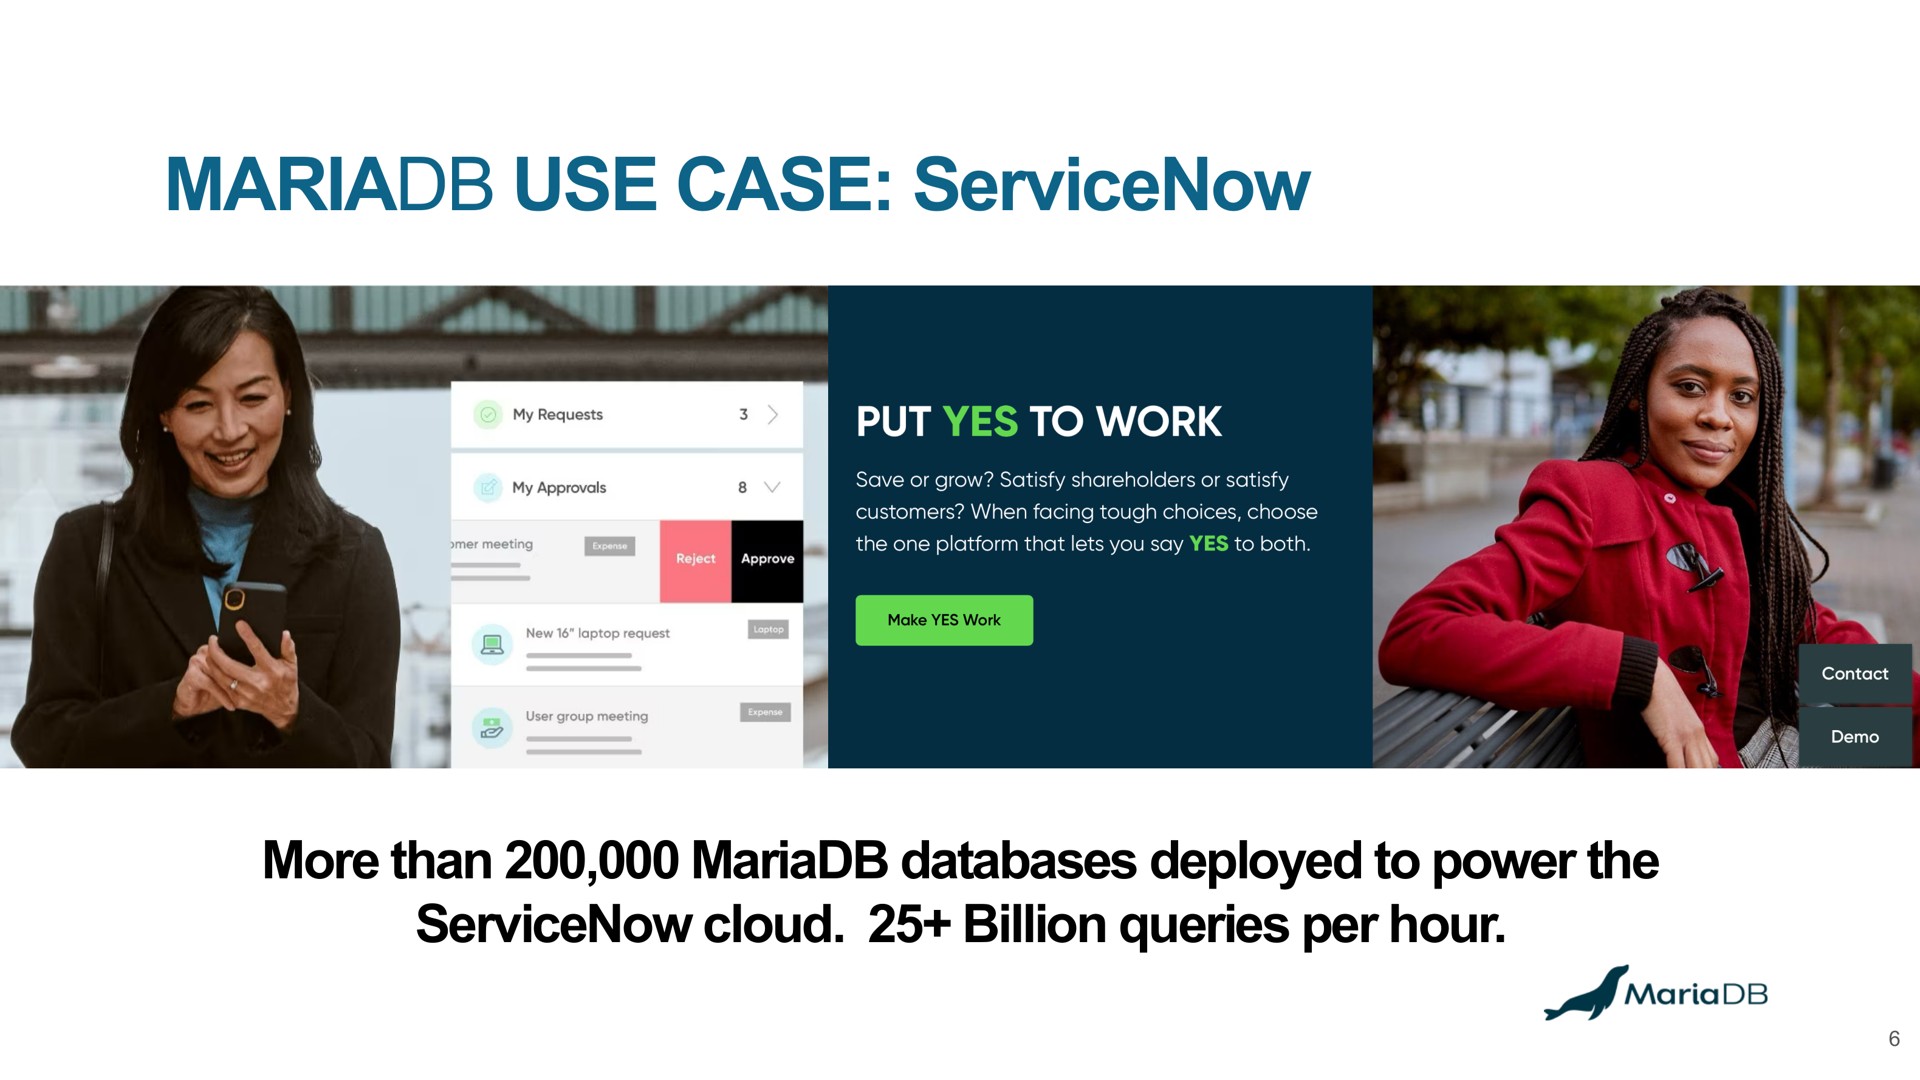 use case more than deployed to power the cloud billion queries per hour eas put yes work | MariaDB